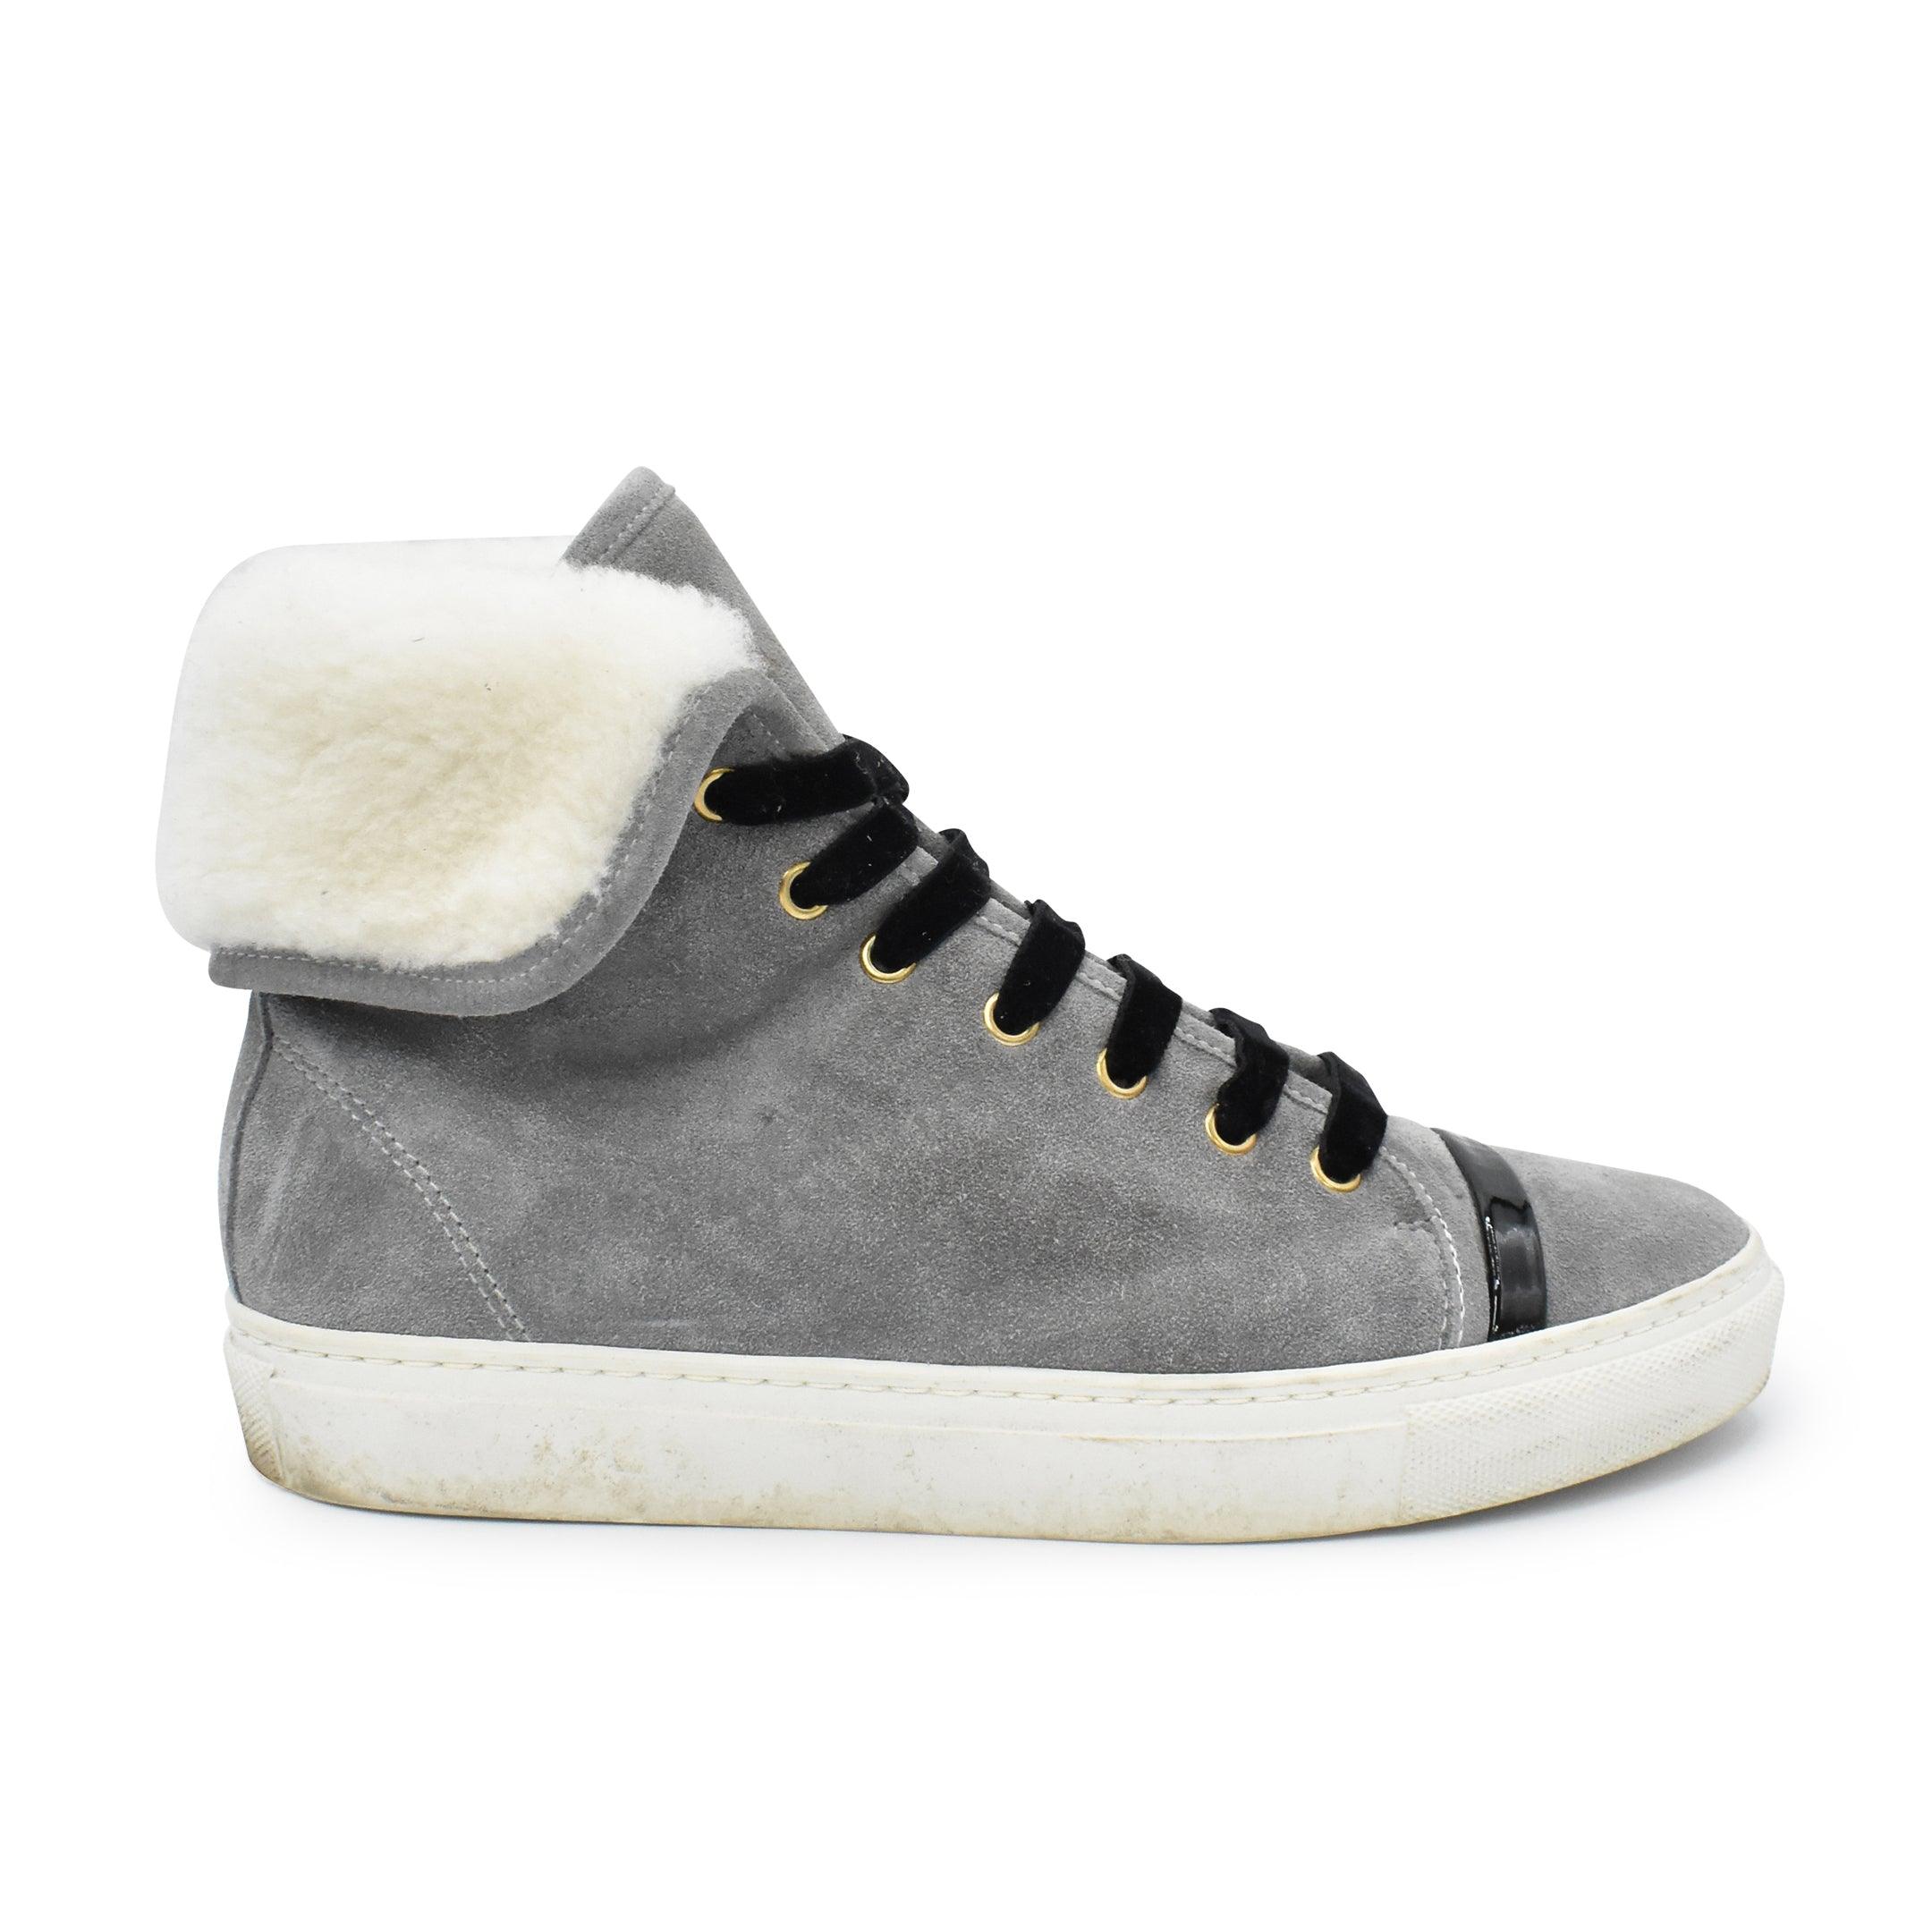 Lanvin High-Top Sneakers - Women's 37 - Fashionably Yours